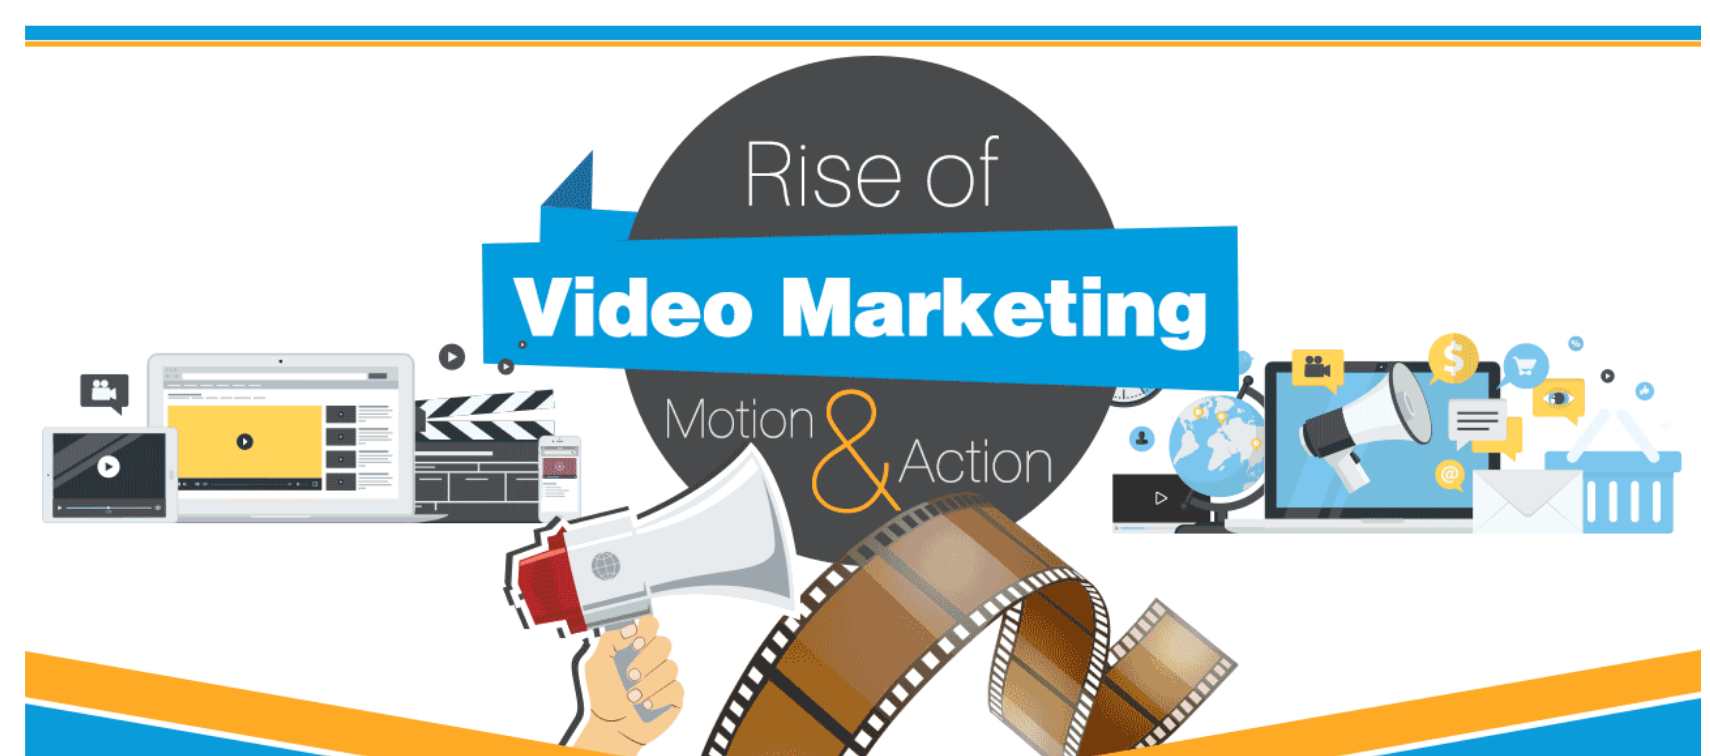 SMB Data Point Of The Week: Video As Popular With SMBs As Consumers?